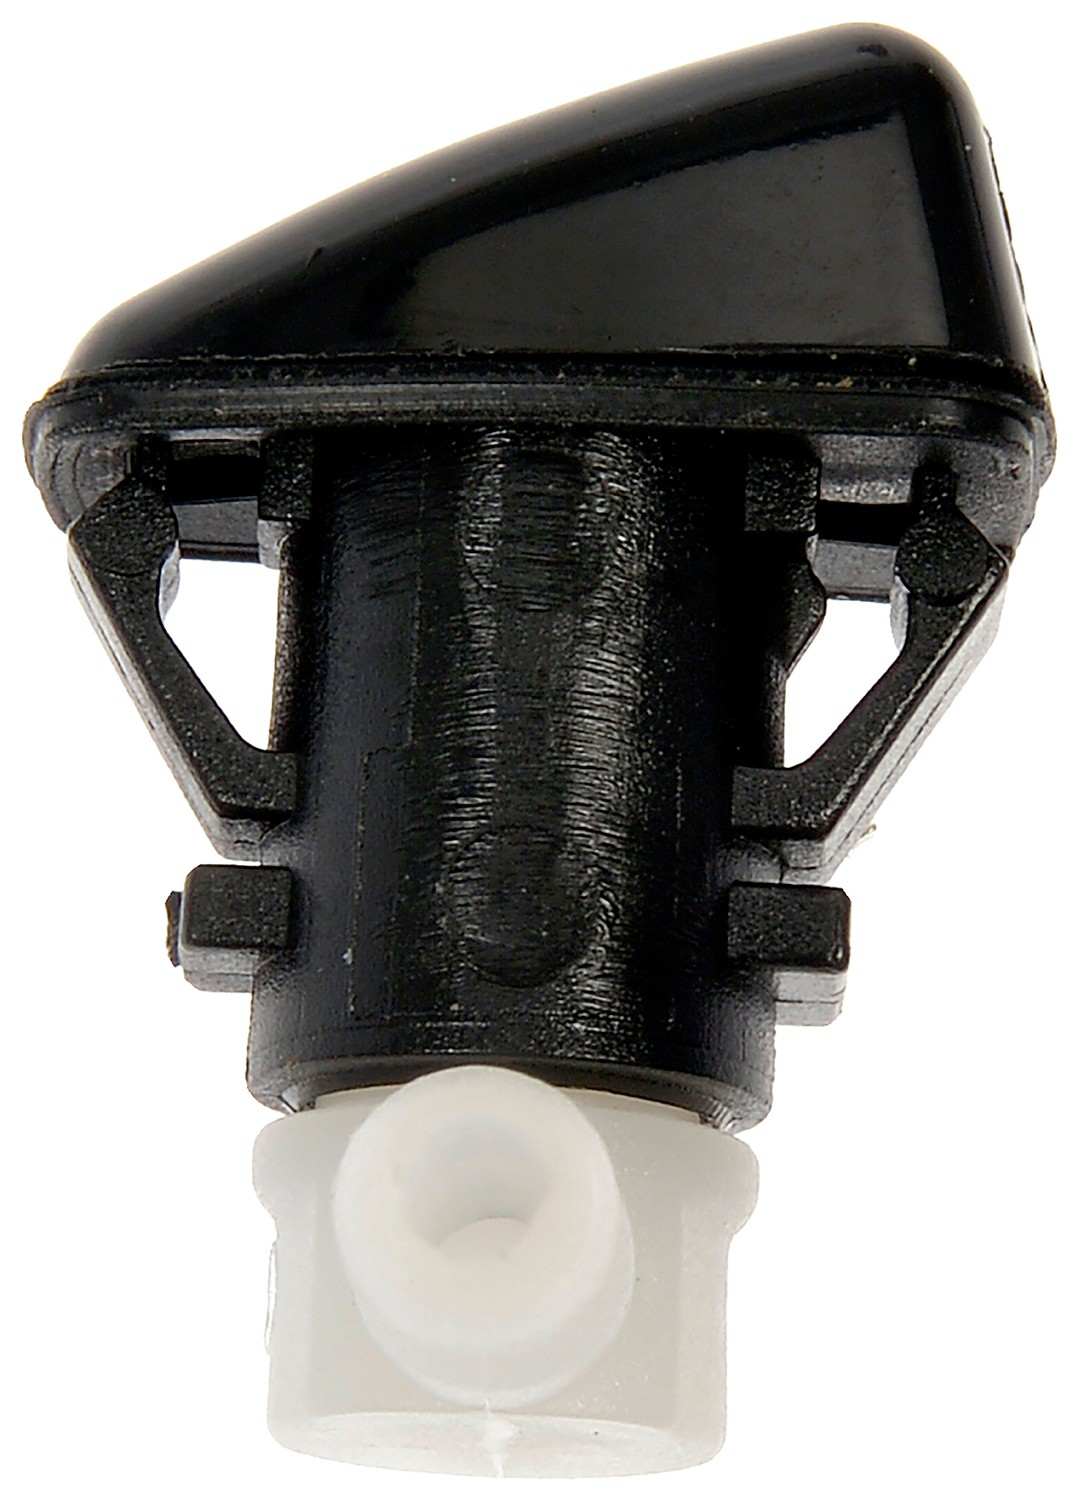 Back View of Left Windshield Washer Nozzle MOTORMITE 58132